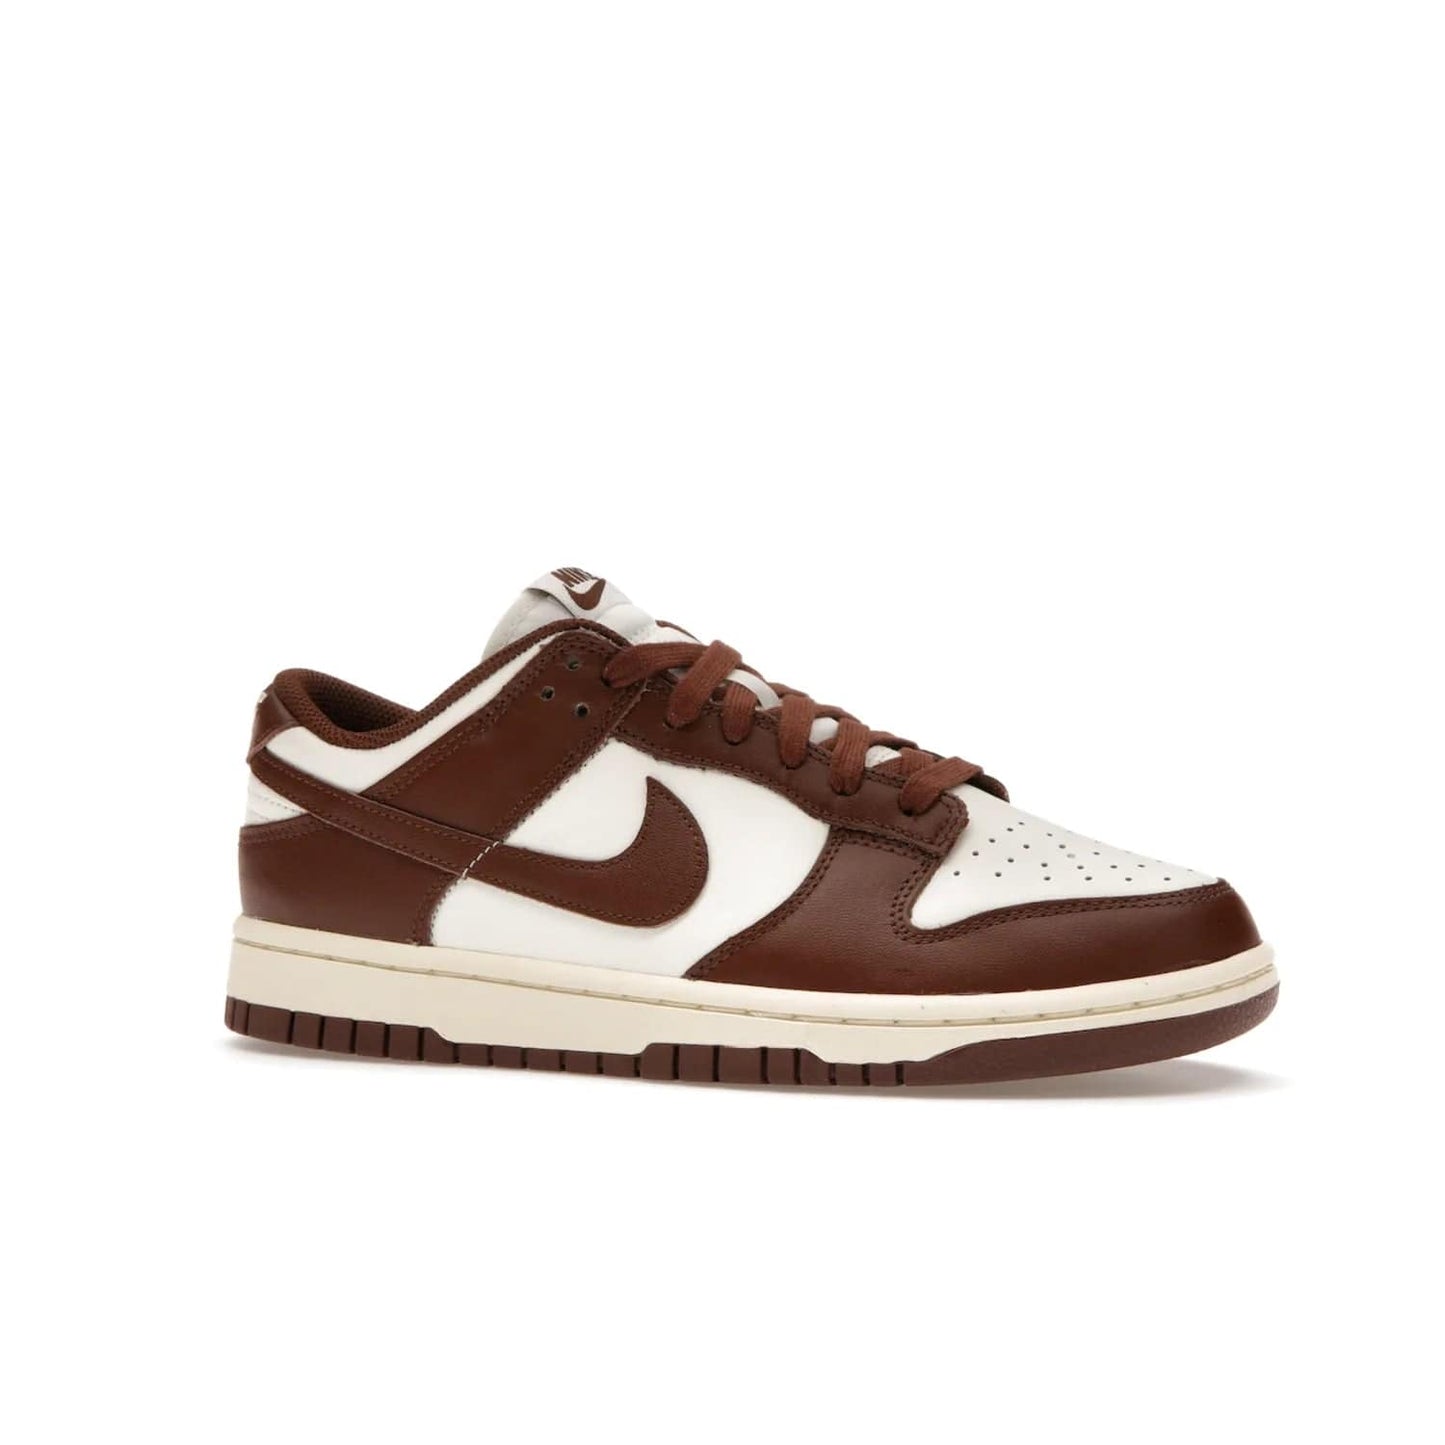 Nike Dunk Low Cacao Wow (Women's) - Image 3 - Only at www.BallersClubKickz.com - Revised
Get the Nike Dunk Low Cacao Wow and make a statement! Plush leather and a cool Cacao Wow finish bring together a unique mix of comfort and fashion that will turn heads. Boosted with a Coconut Milk hue. Shop today.